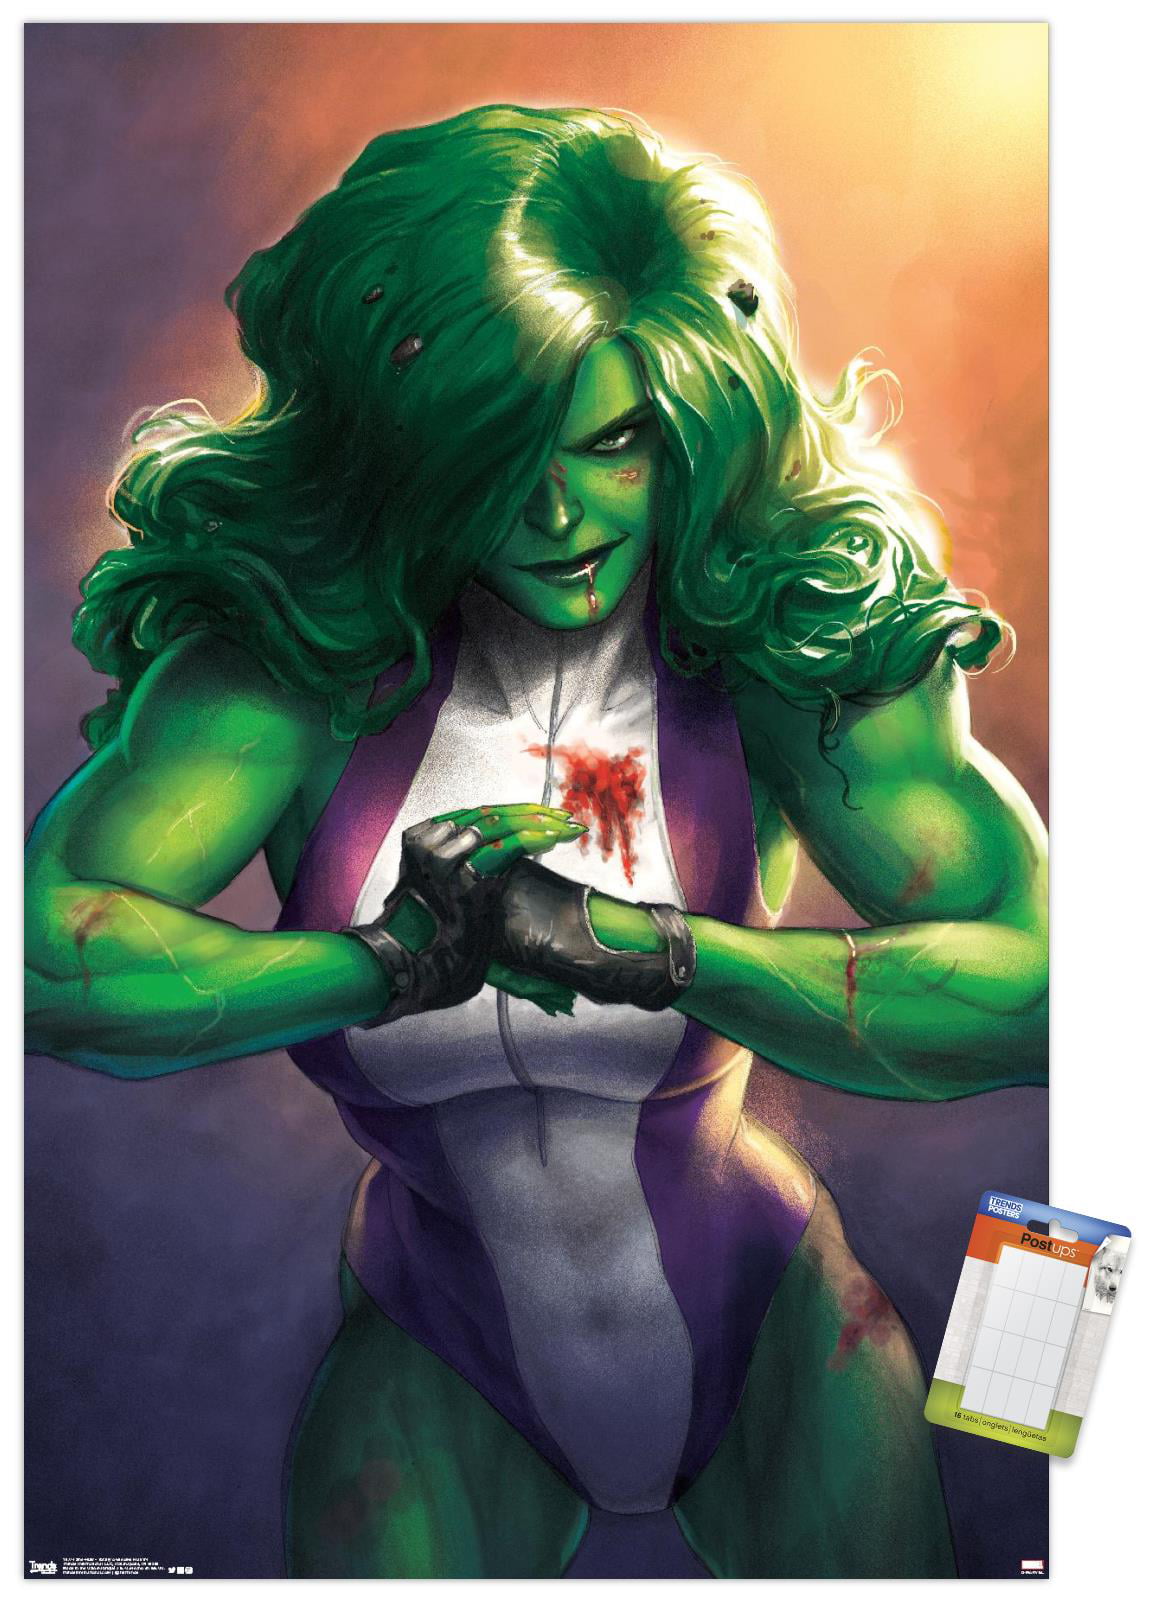 Marvel Comics - She-Hulk - Totally Awesome Hulk - Cover #4 Wall Poster,  14.725 x 22.375